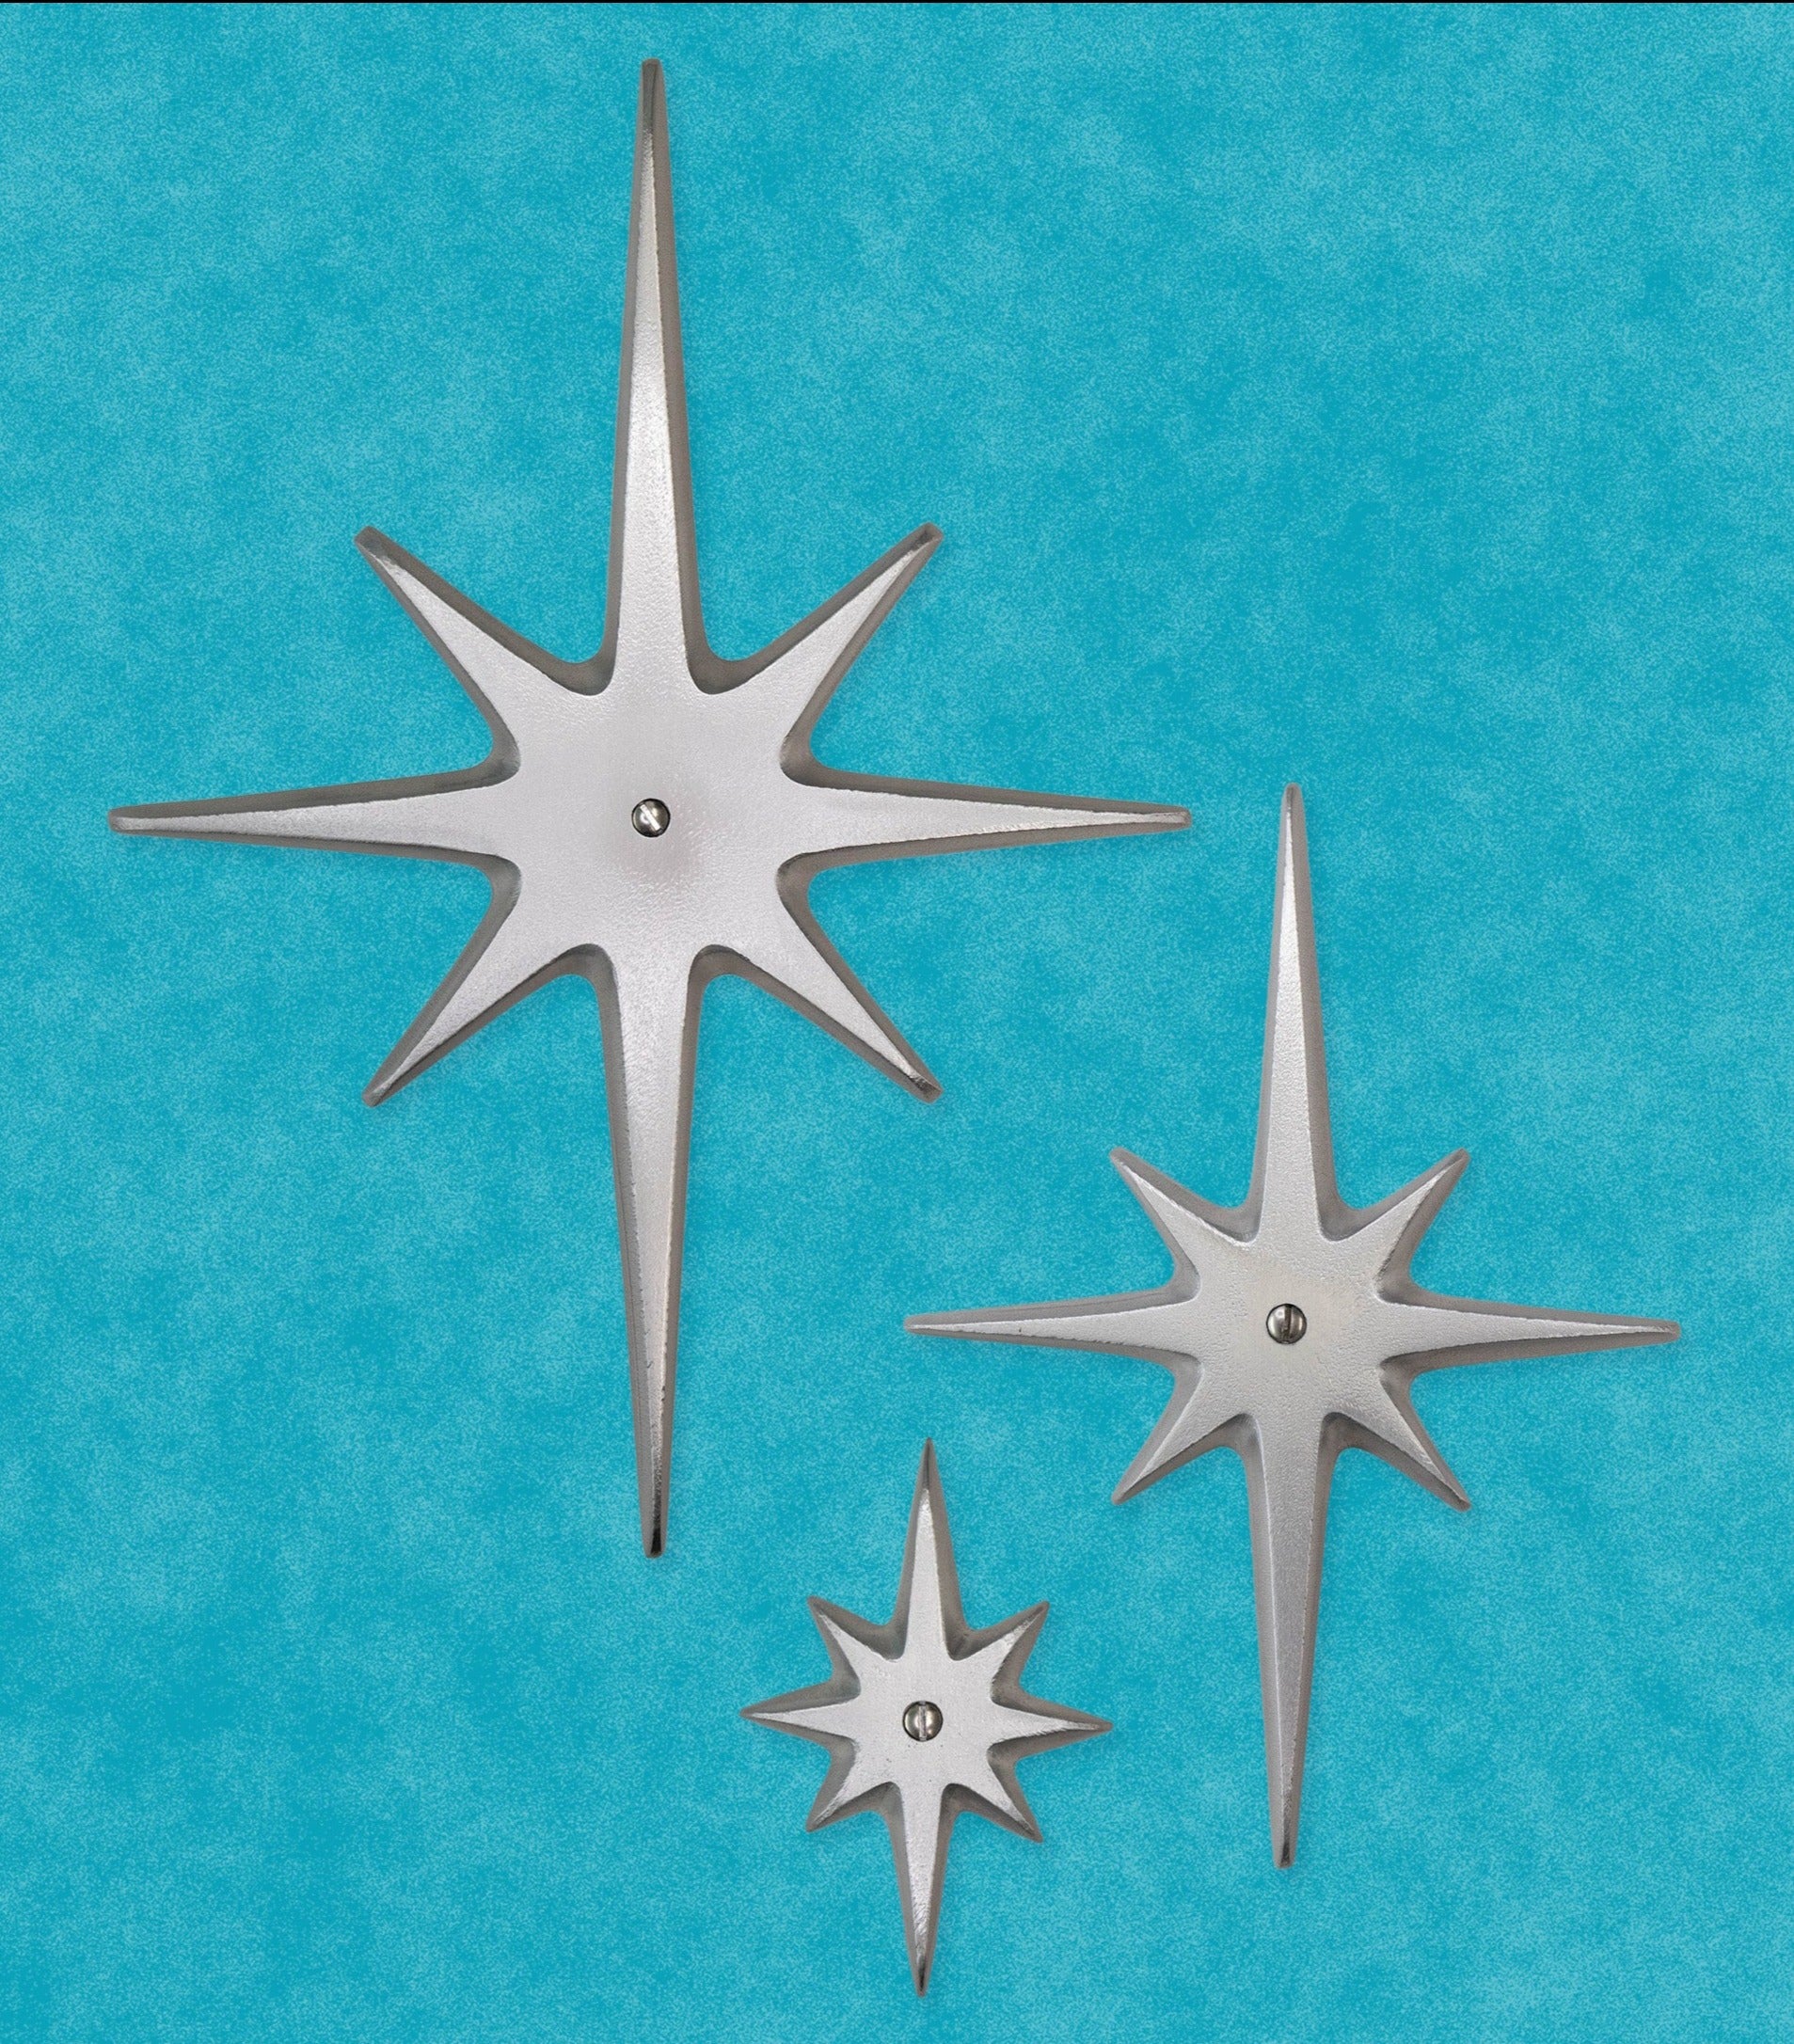 A set of three cast aluminum starbursts: Large, medium, and small, each with a single screw at the very center. The style of starburst has the 2 longest points top and bottom, 2 medium points horizontal, and the other 4 shortest points diagonal in between. The aluminum is silver in color. They have smooth but slightly textured finish due to the natural aluminum. There is slight shine, but are not glossy.